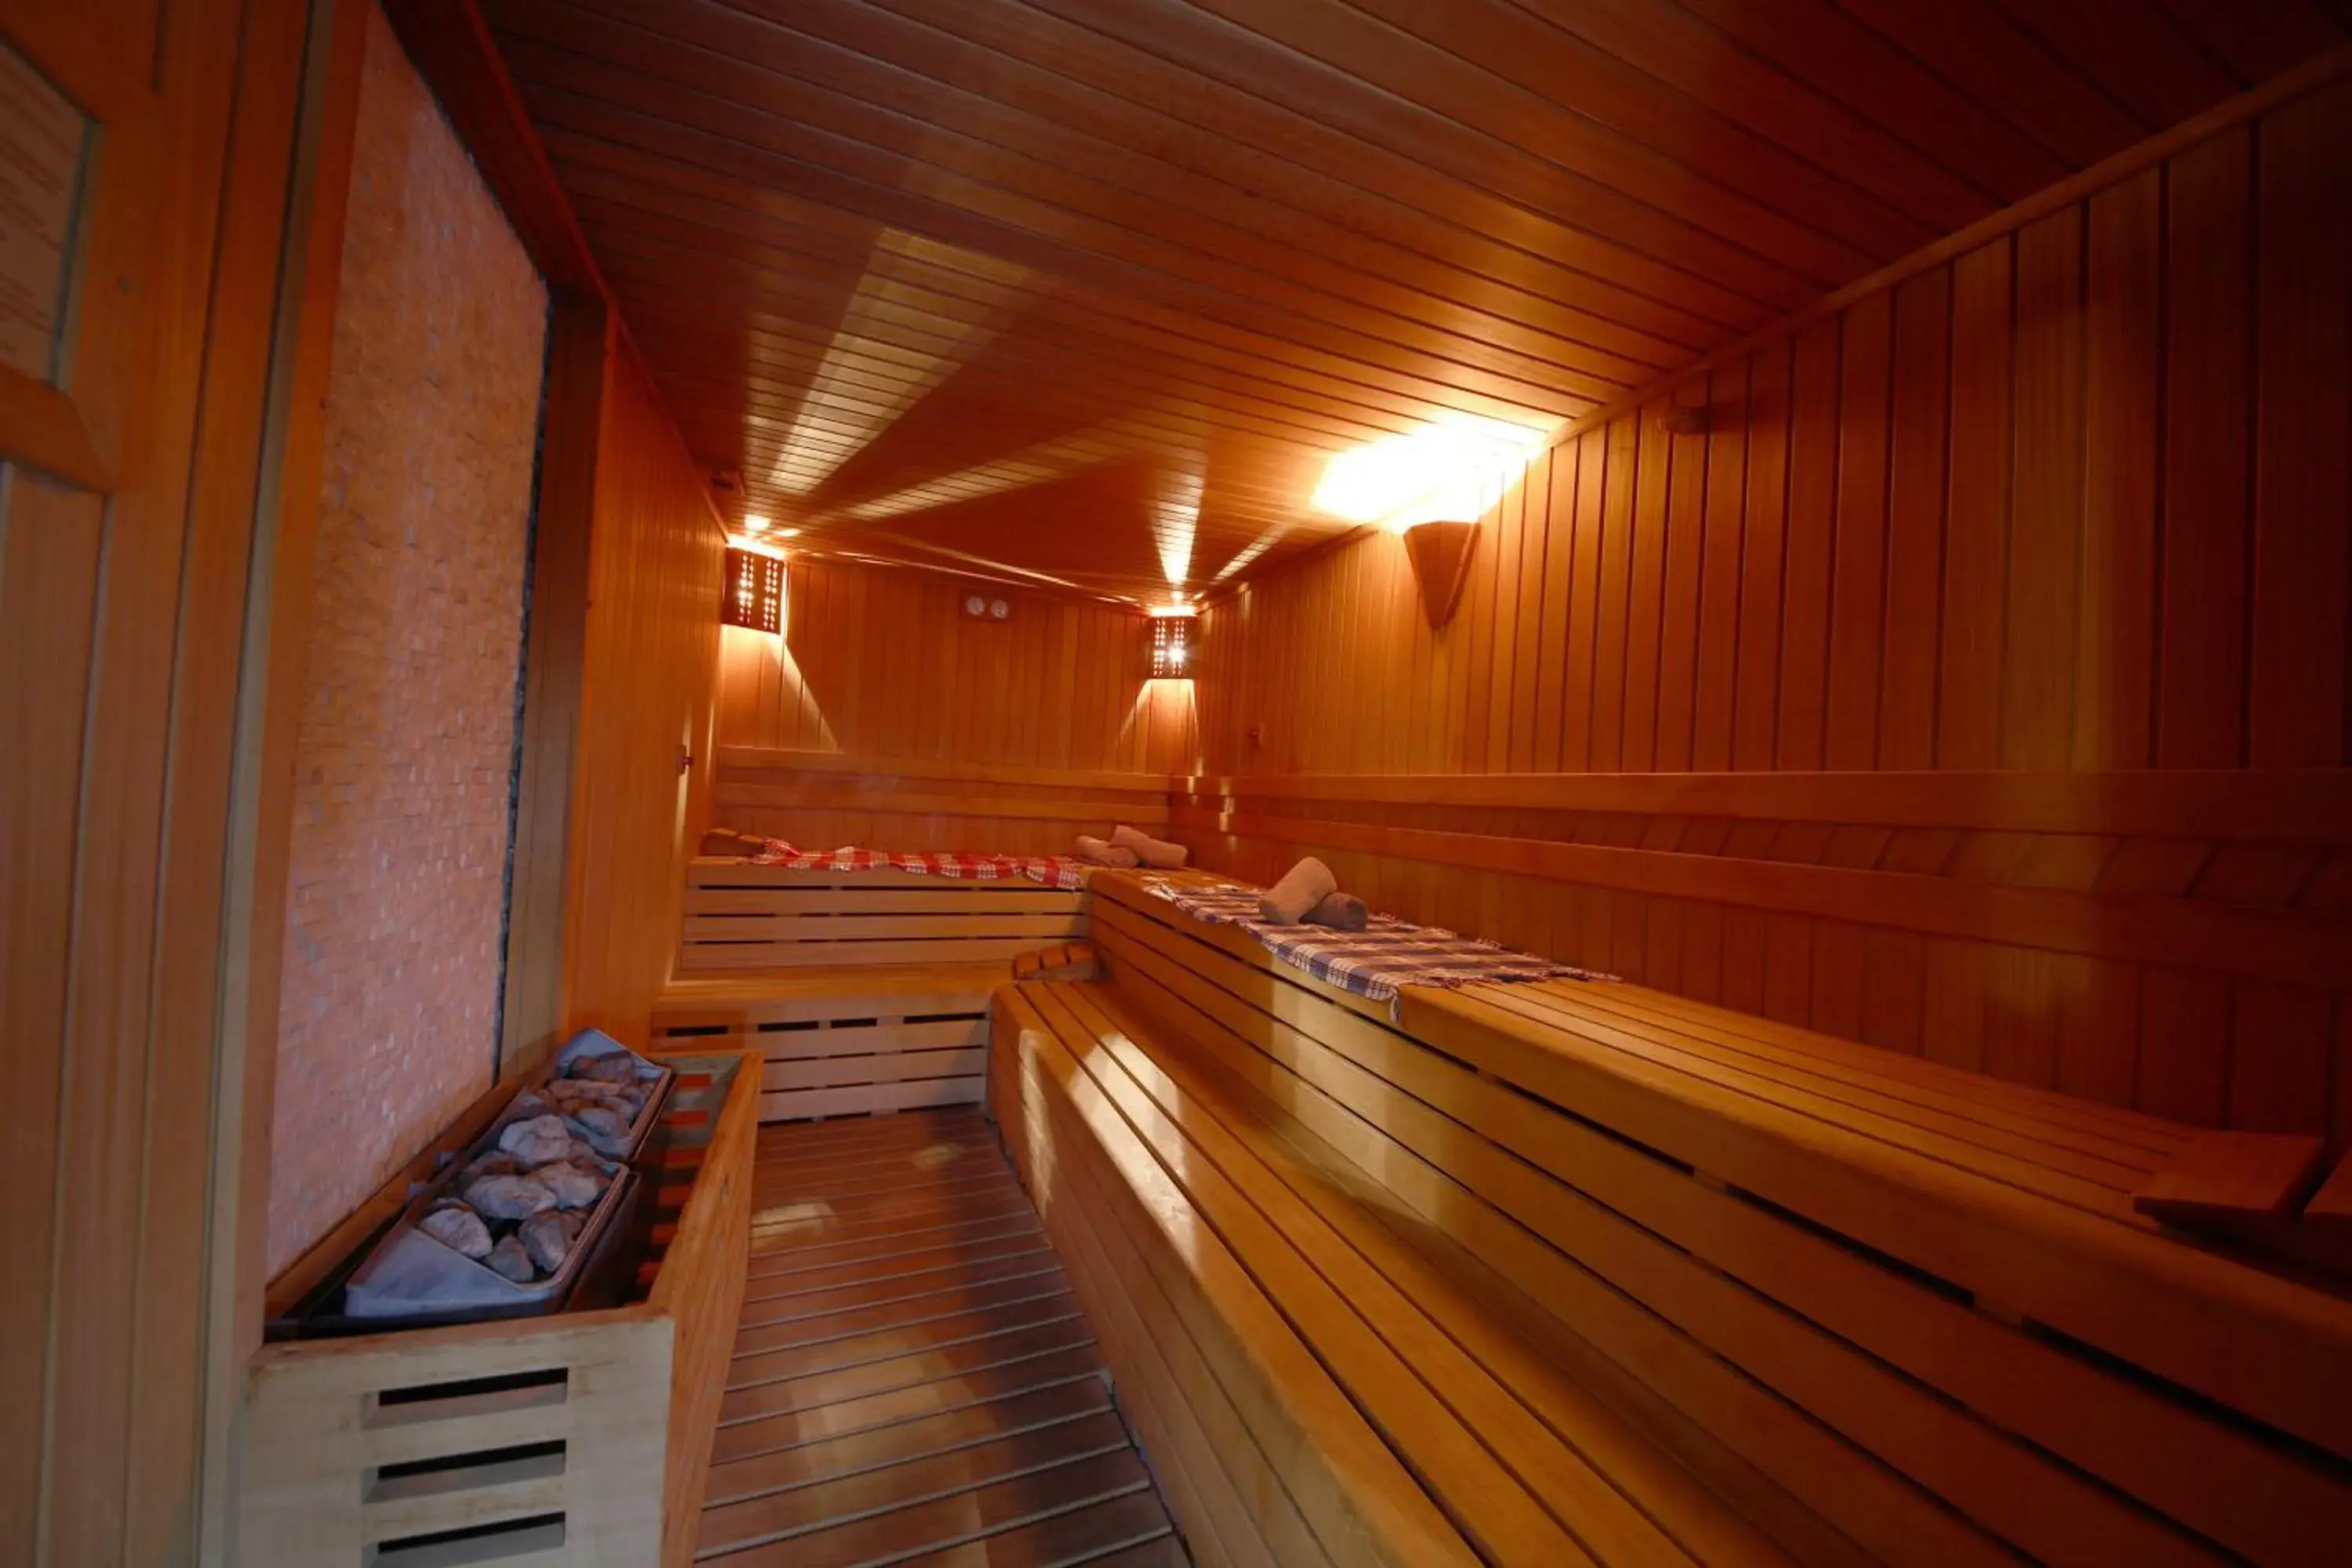 Sauna in Dosso Dossi Hotels Old City